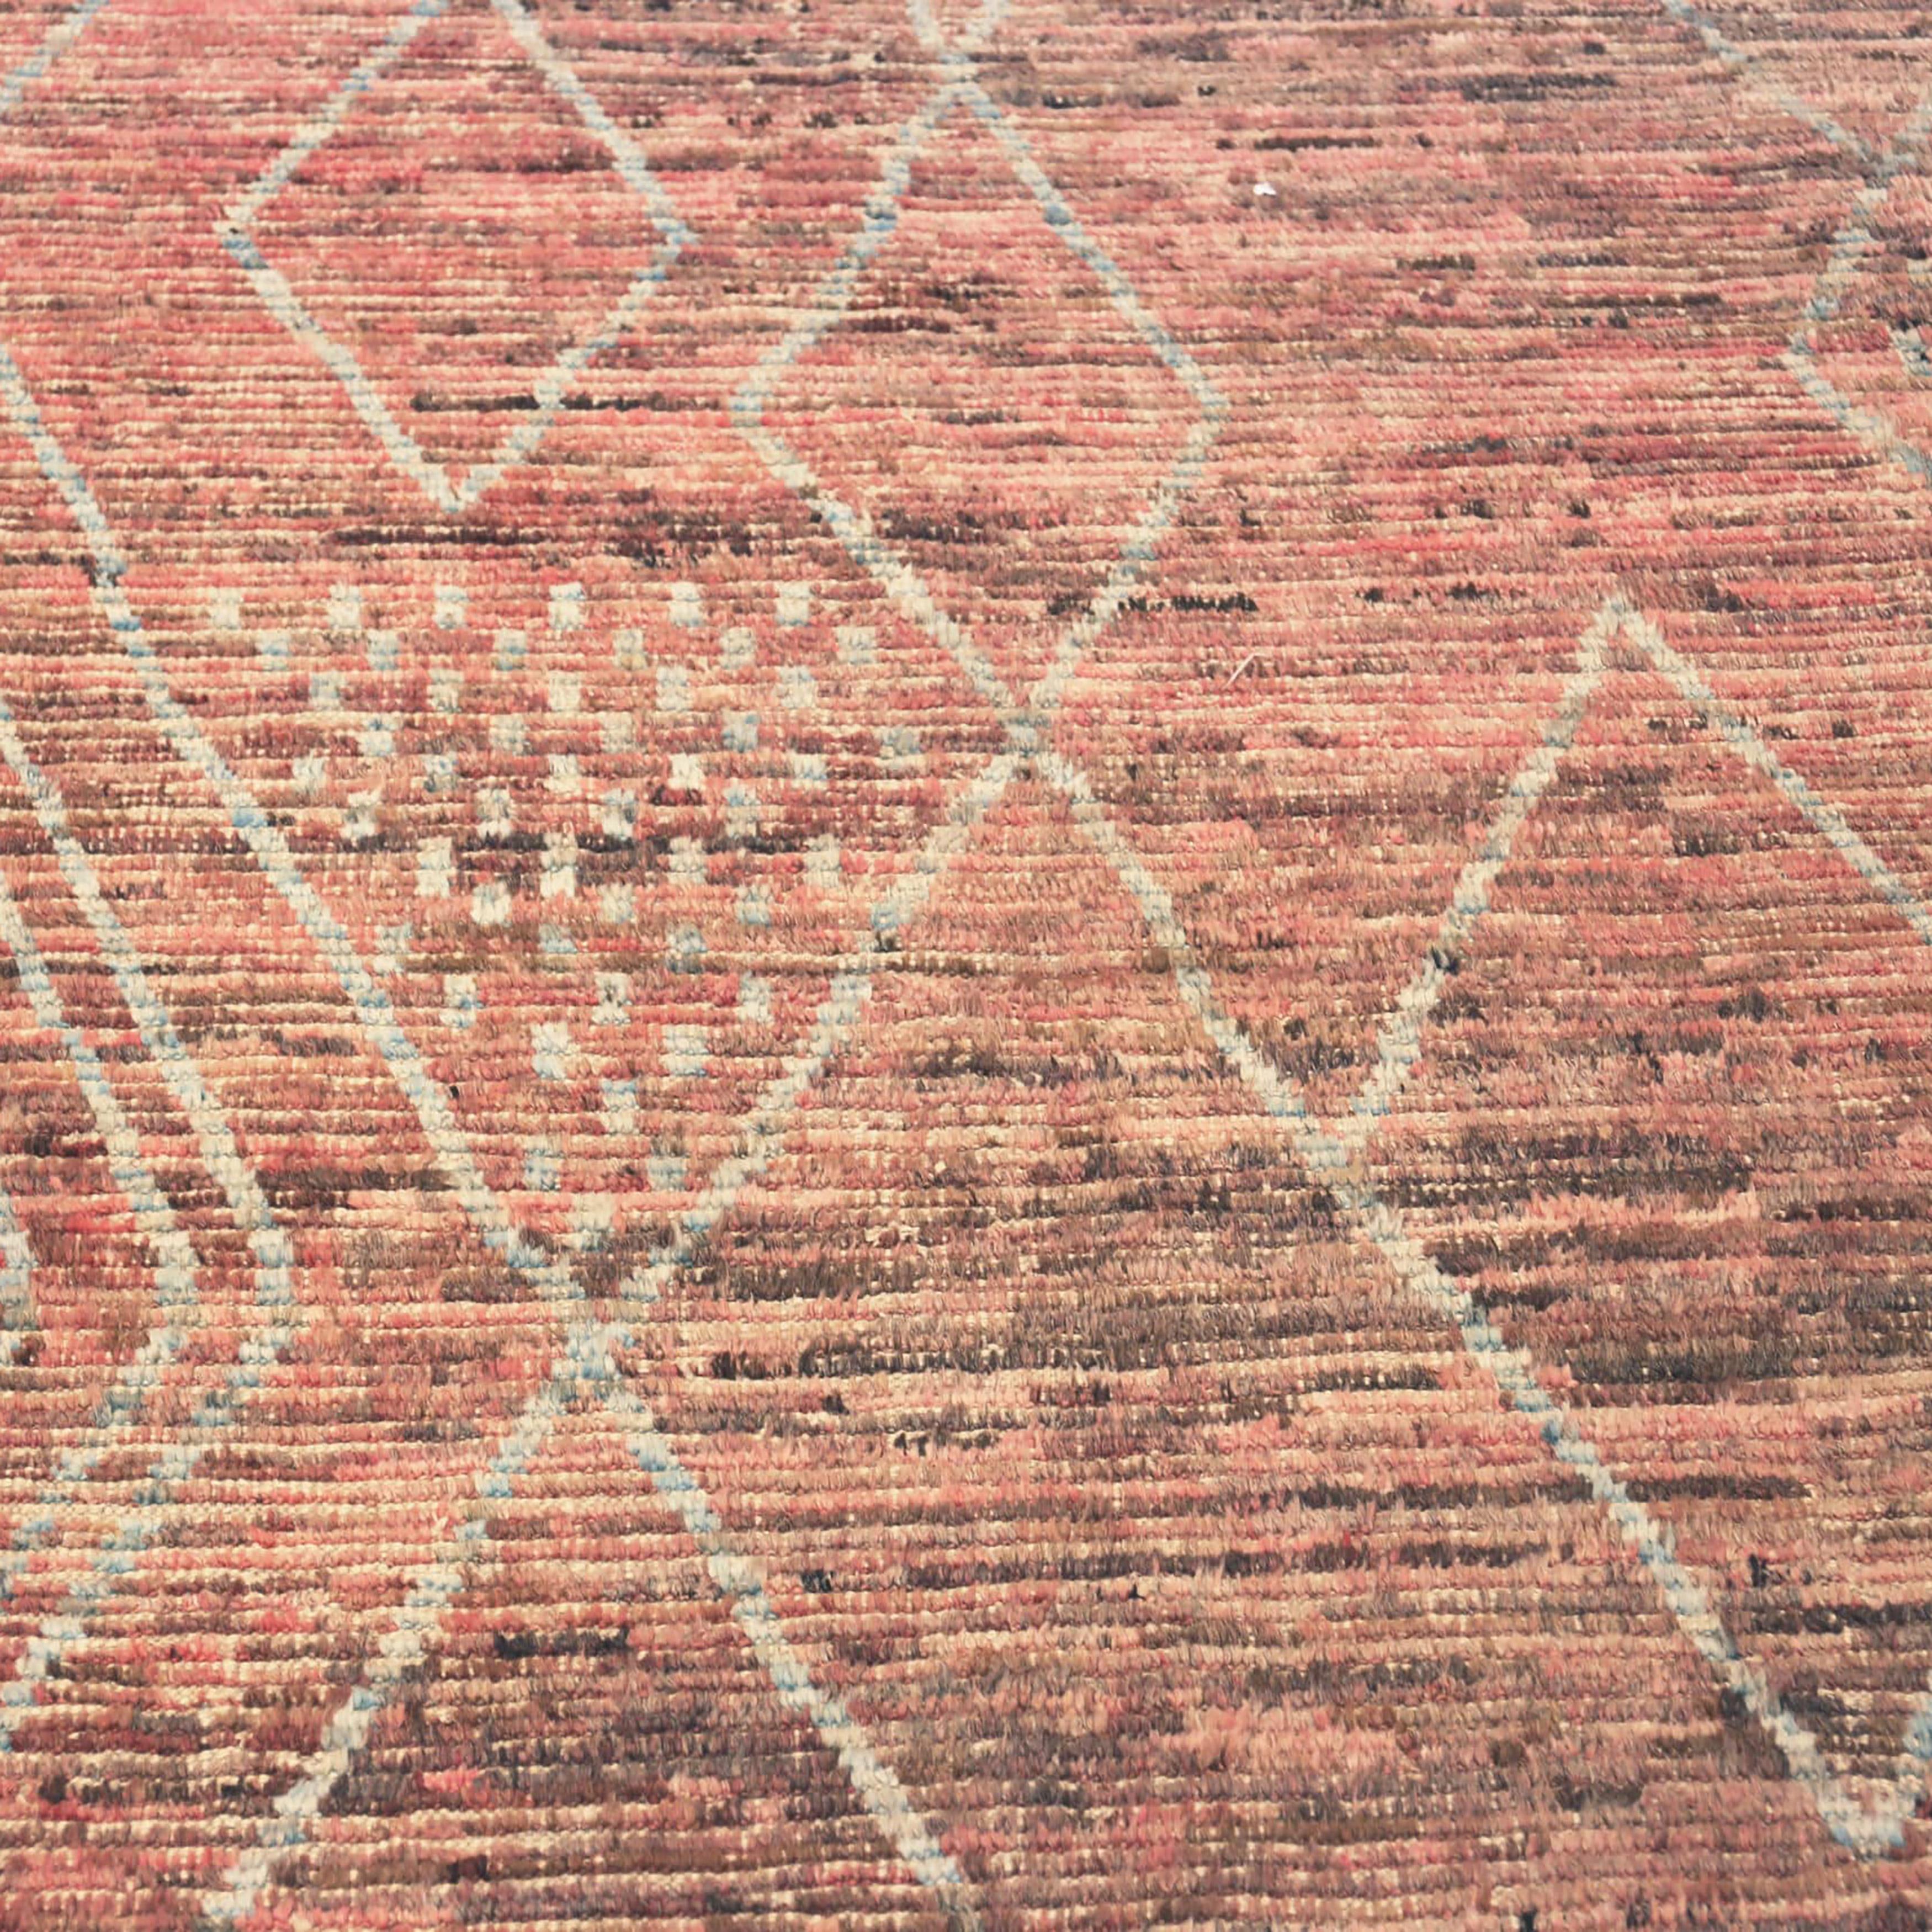 Masterful craftsmanship and strong antique quality make this Zameen Mid Century Modern Rug 10'3